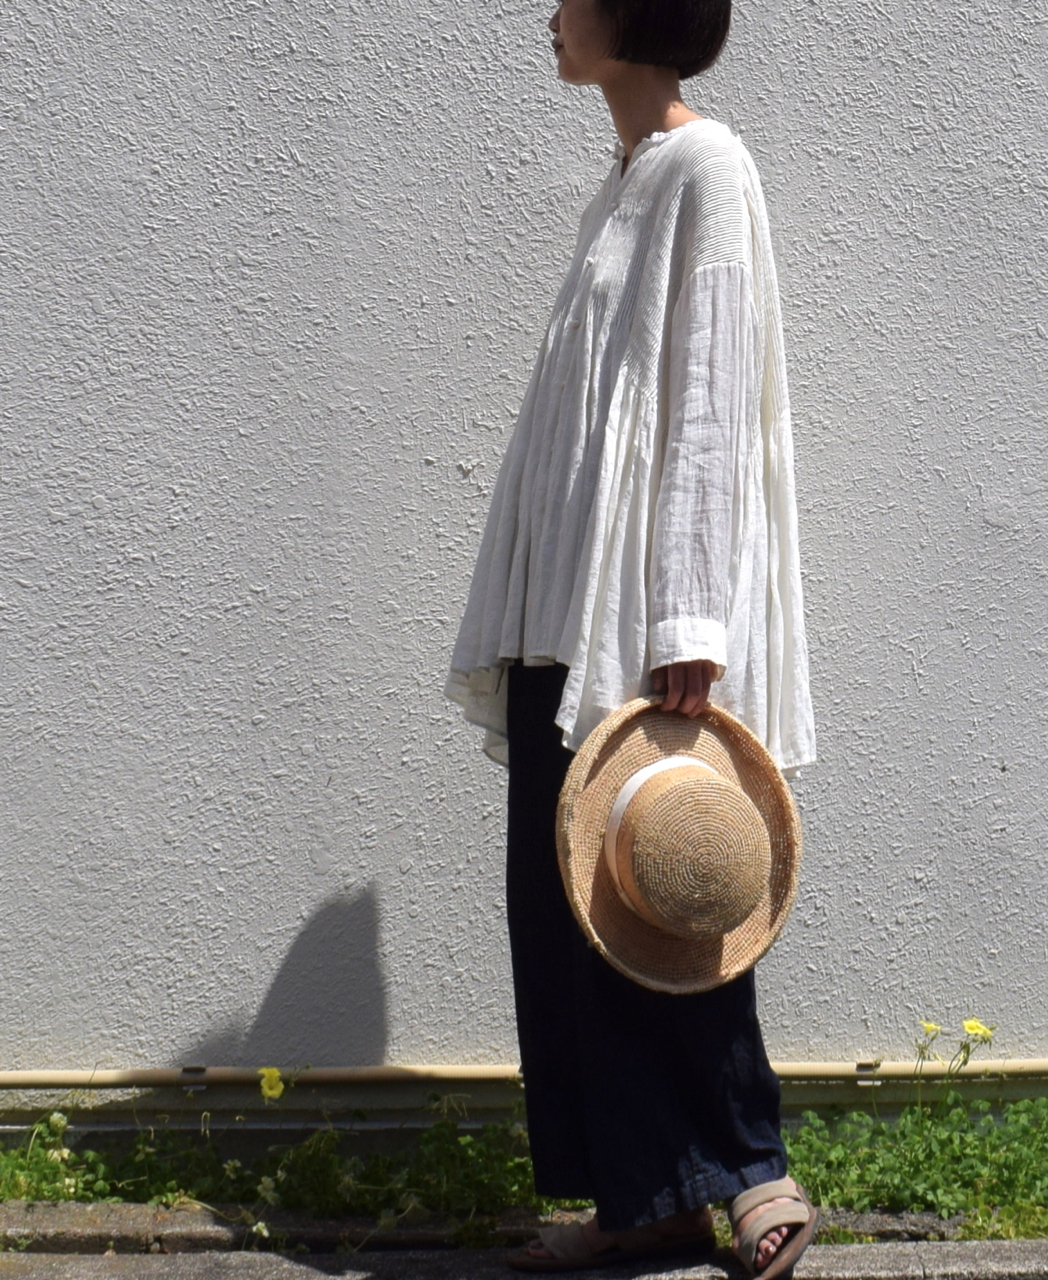 GNMDS2102CL (コットンリネンパンツ) WASHED COTTON LINEN EASY WIDE PANTS